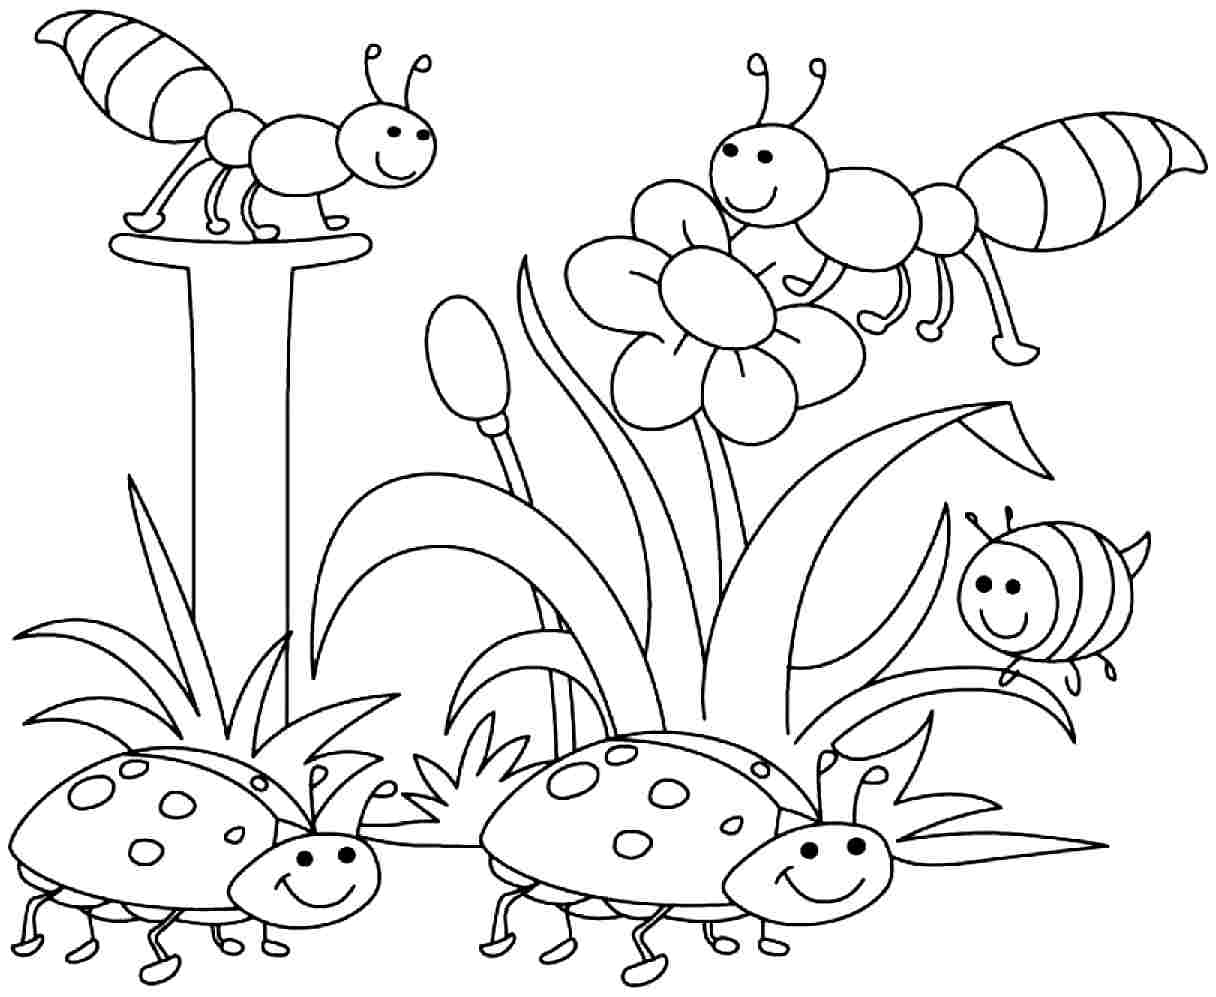 Spring Coloring Pages To Print Pdf To Print   Coloring Pages ...